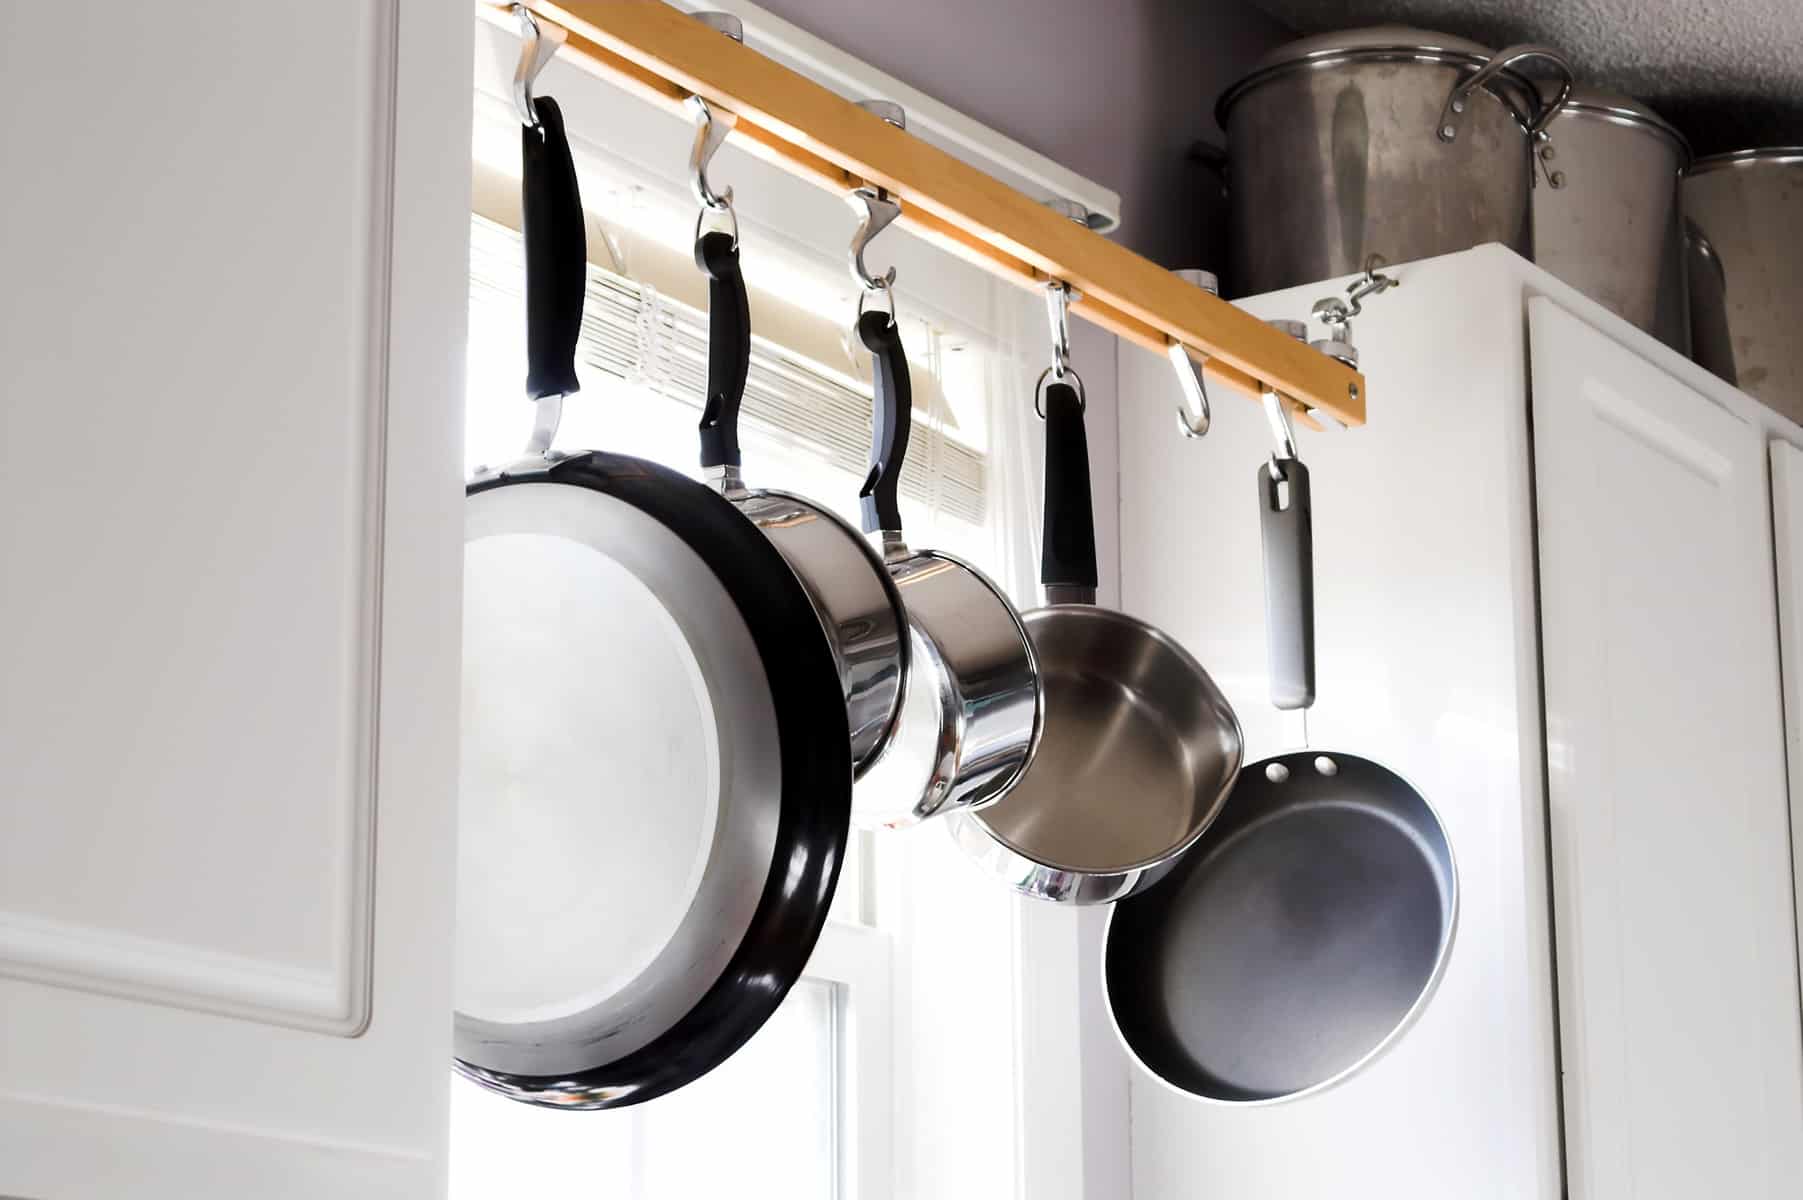 stainless steel cooking pans hanging in a window from hooks on a wooden rod